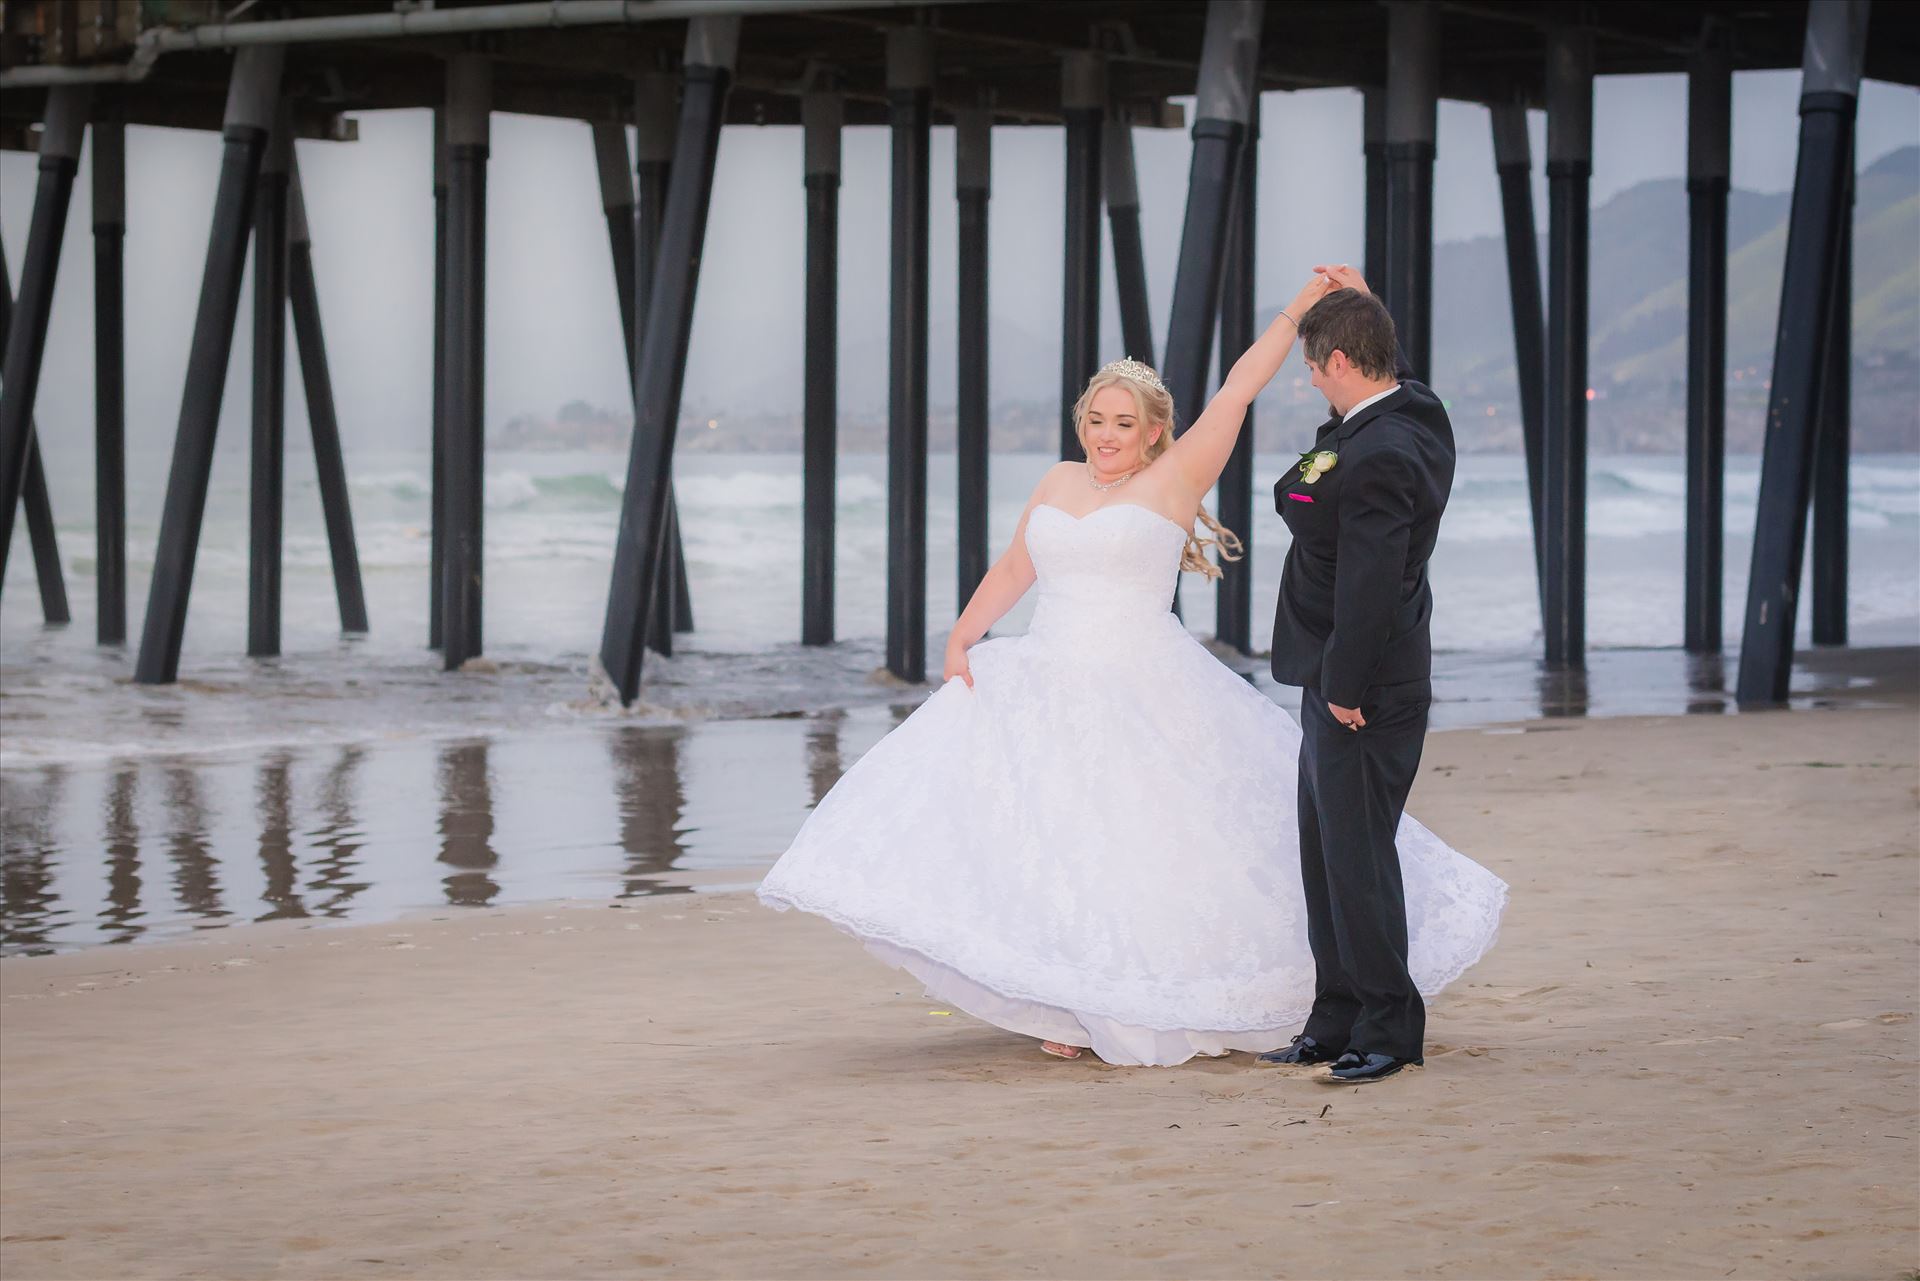 Jessica and Michael 68 - Sea Venture Resort and Spa Wedding Photography by Mirror's Edge Photography in Pismo Beach, California. Bride and Groom at Pismo Beach Pier by Sarah Williams